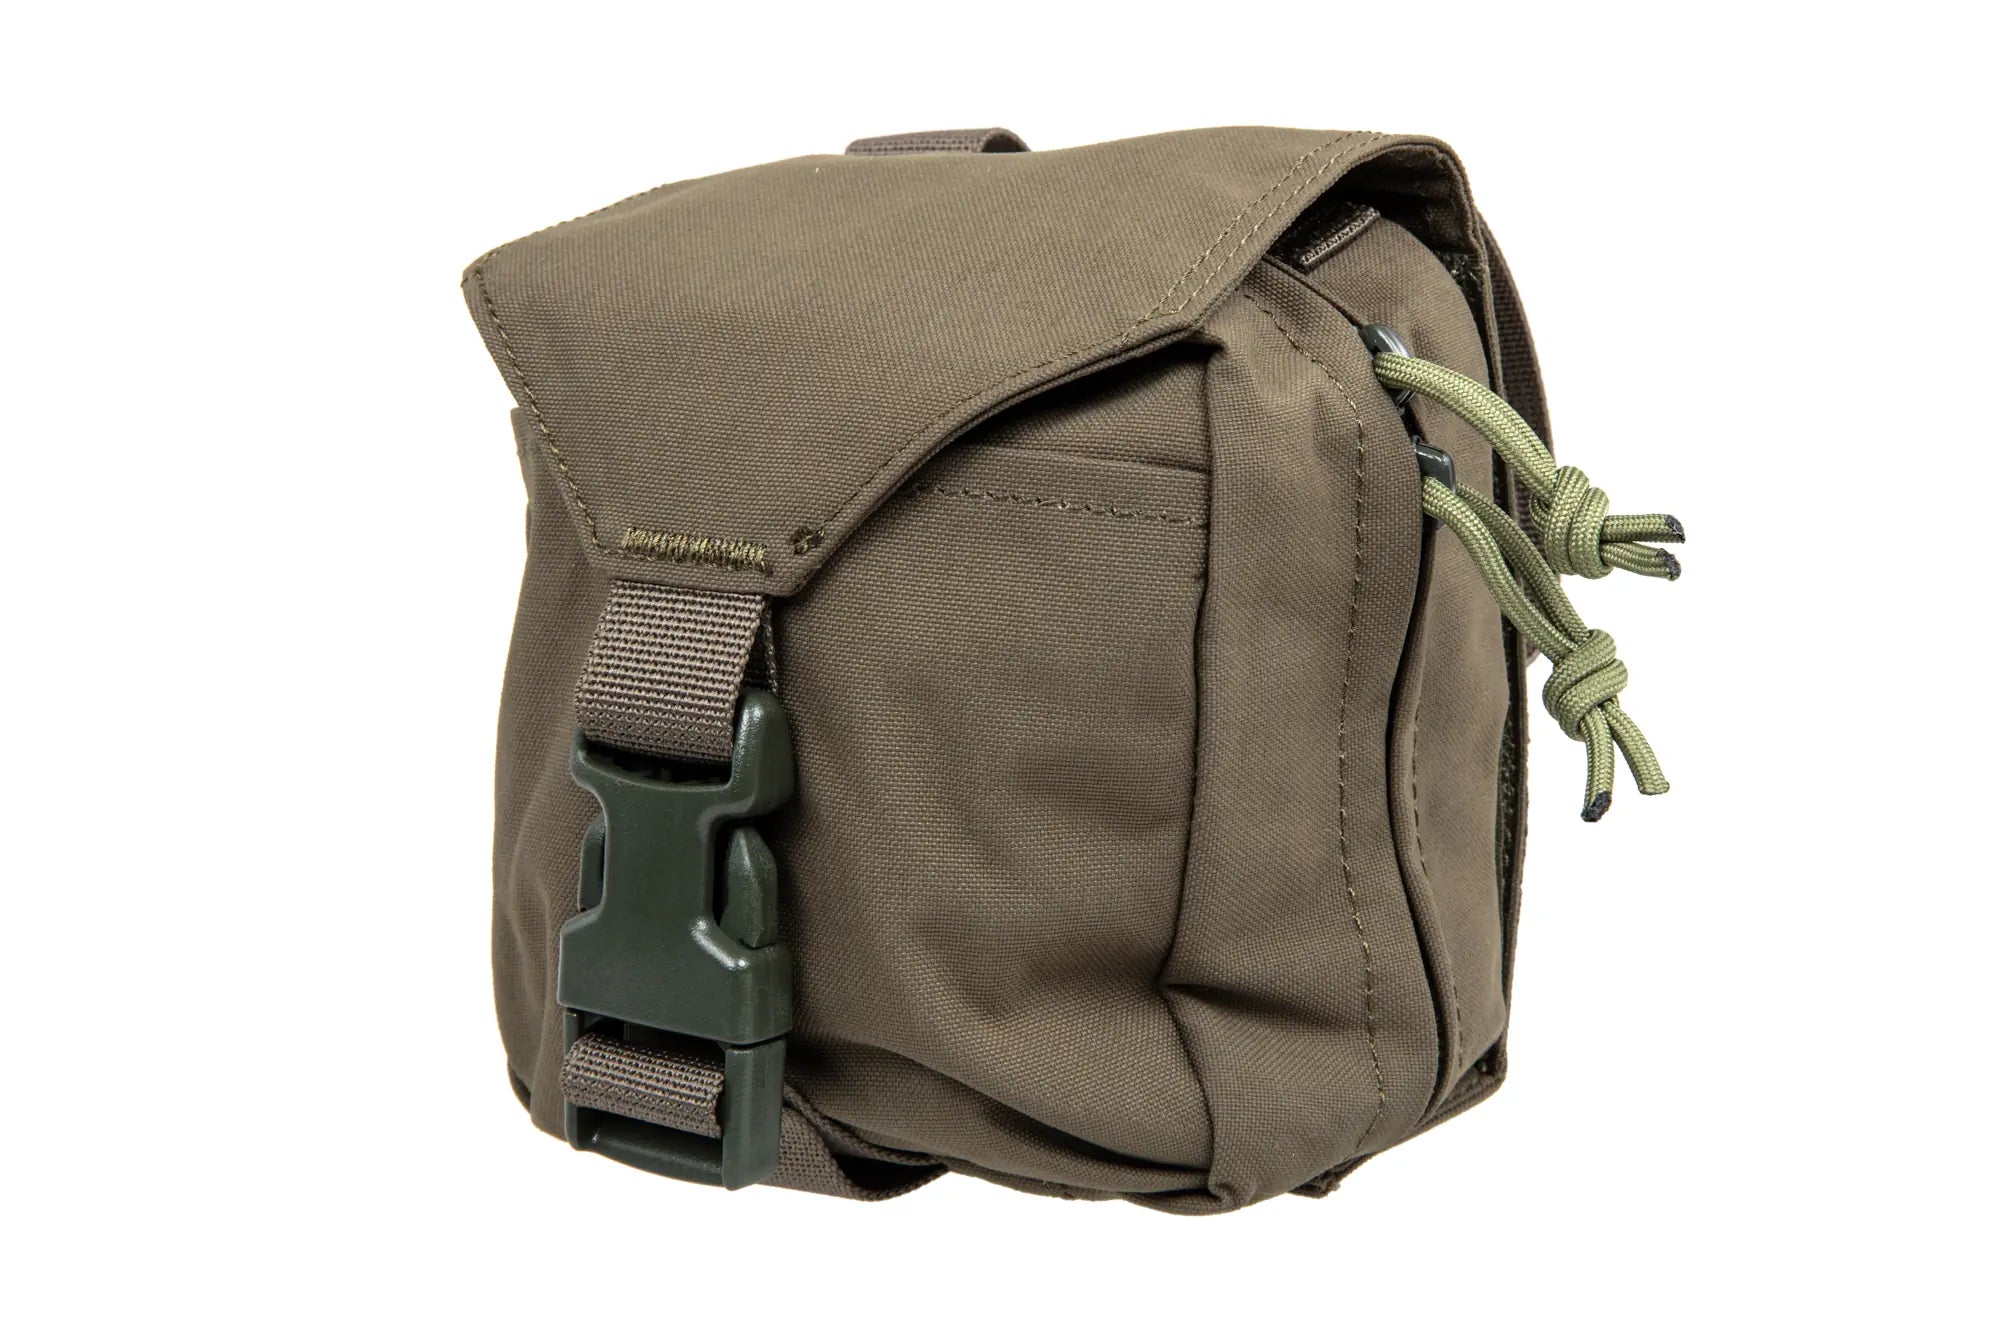 First aid kit with Molle panel Wosport Ranger Green-1